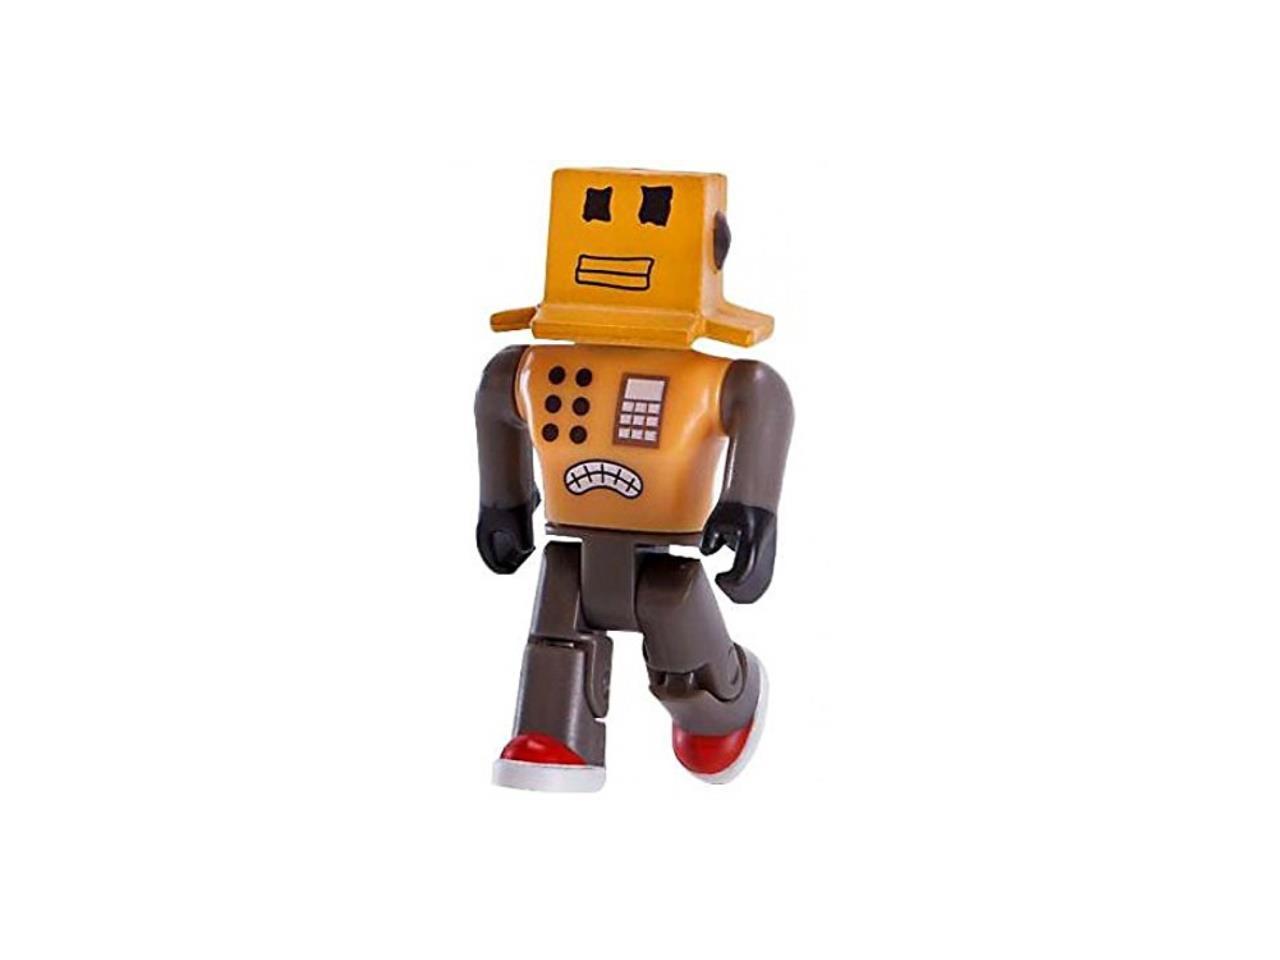 Roblox Series 1 Mr Robot Action Figure Mystery Box Virtual Item Code 2 5 Newegg Com - keith roblox toy code